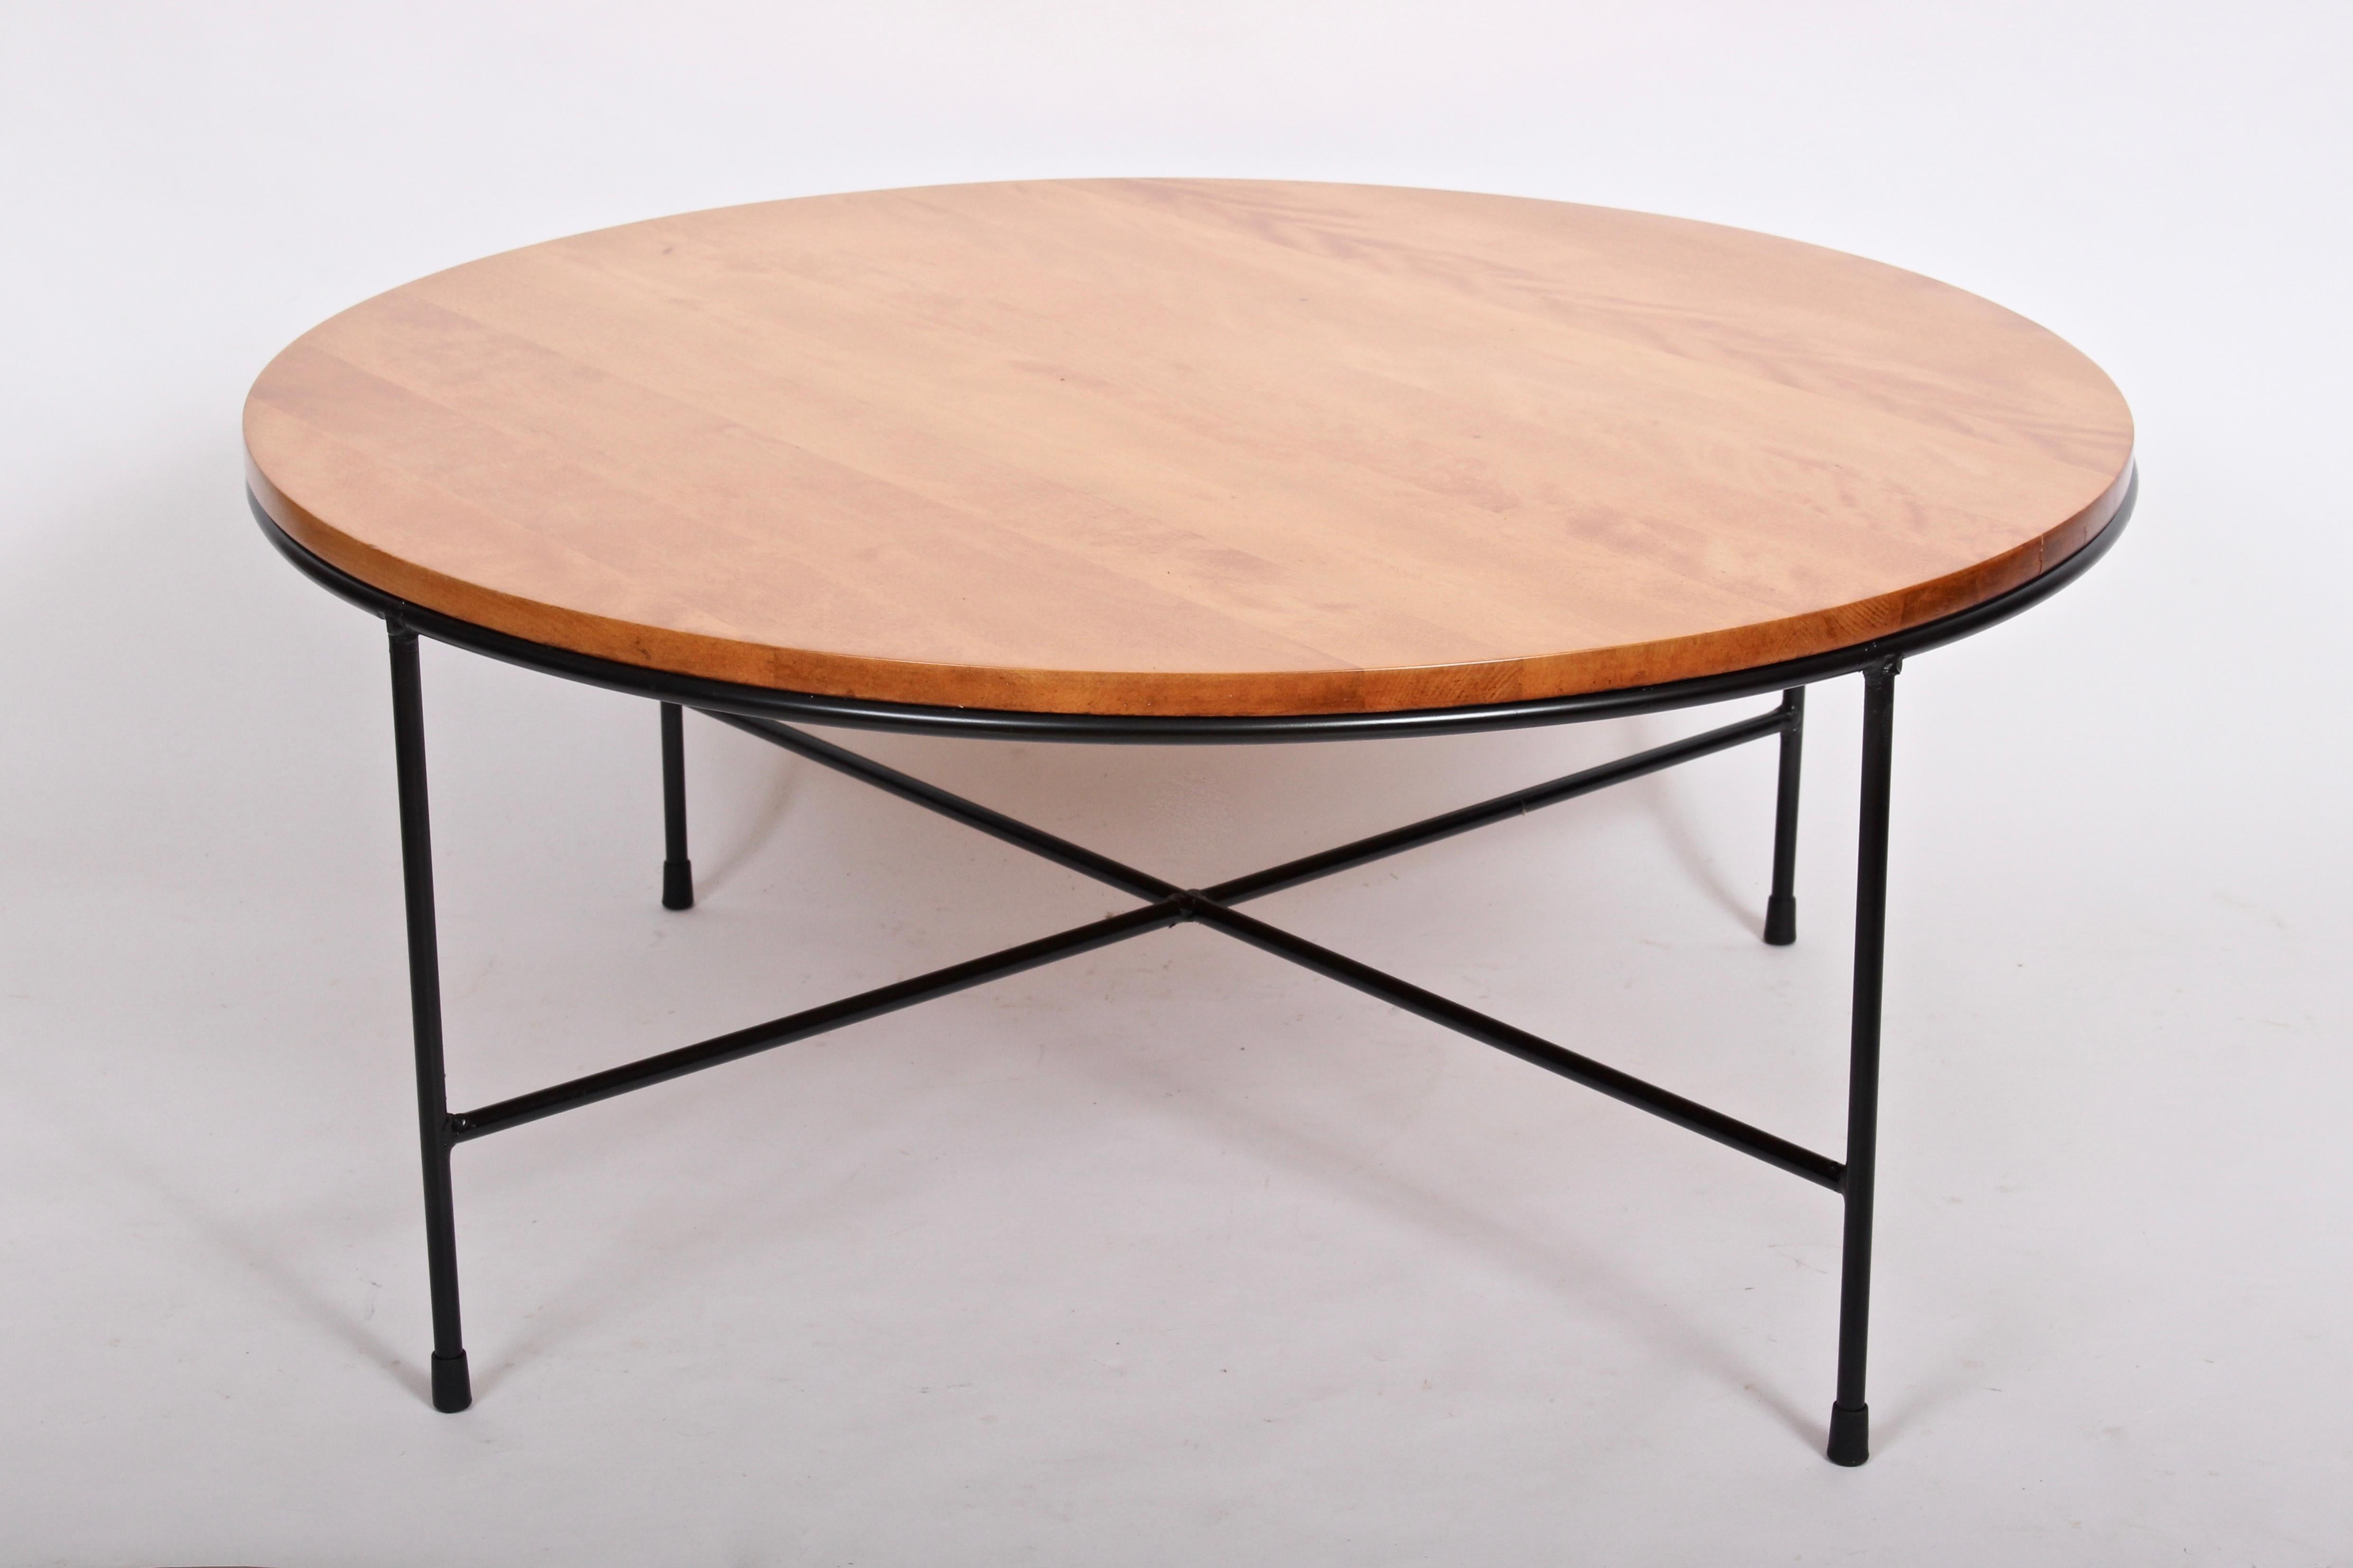 Vintage Paul McCobb Planner Group for Winchendon Model 1580 Maple & Iron Coffee Table. Featuring a professionally refinished sturdy, balanced and Black enameled Wrought Iron x framework, inset with circular, natural finish flame Maple staved solid